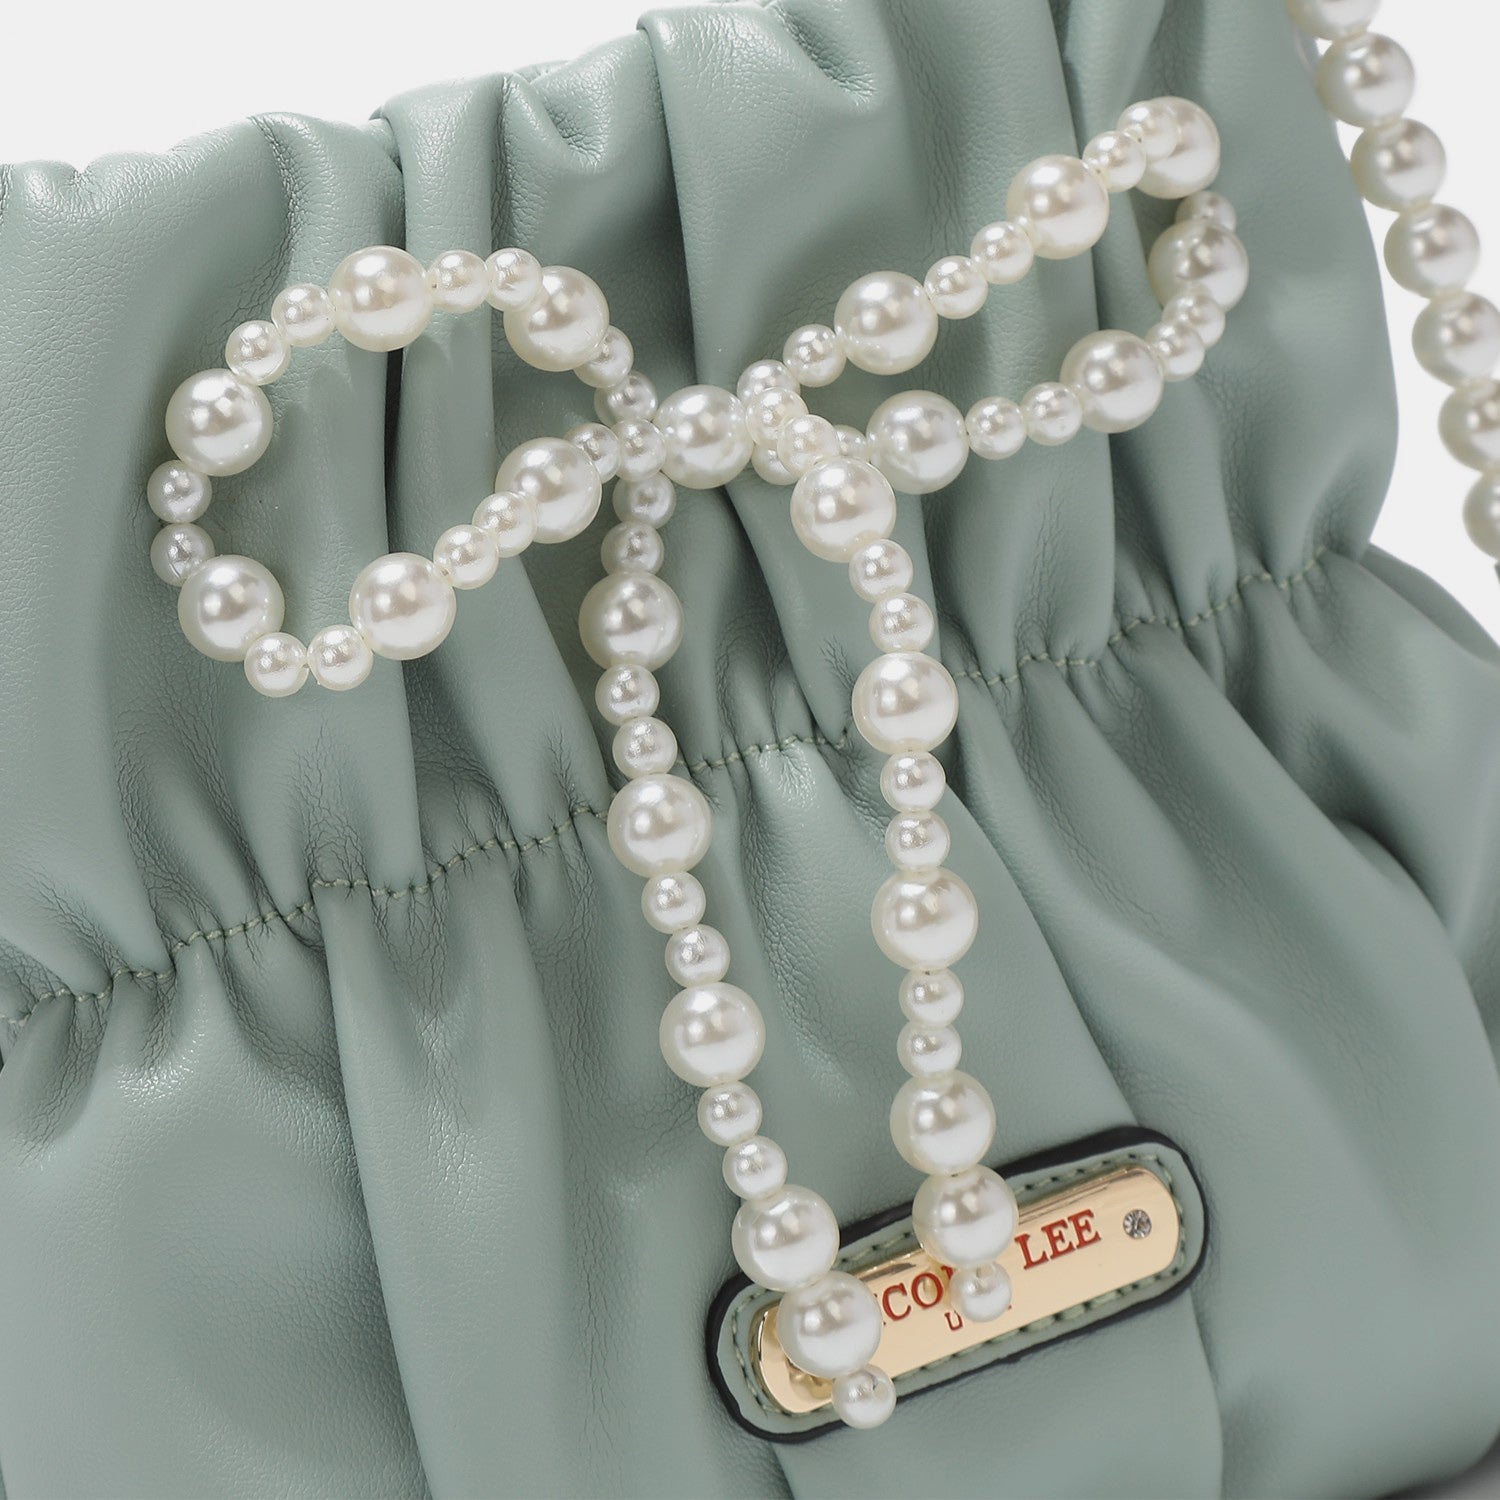 Pearl Bow Chain Strap Purse - 4 Ever Trending